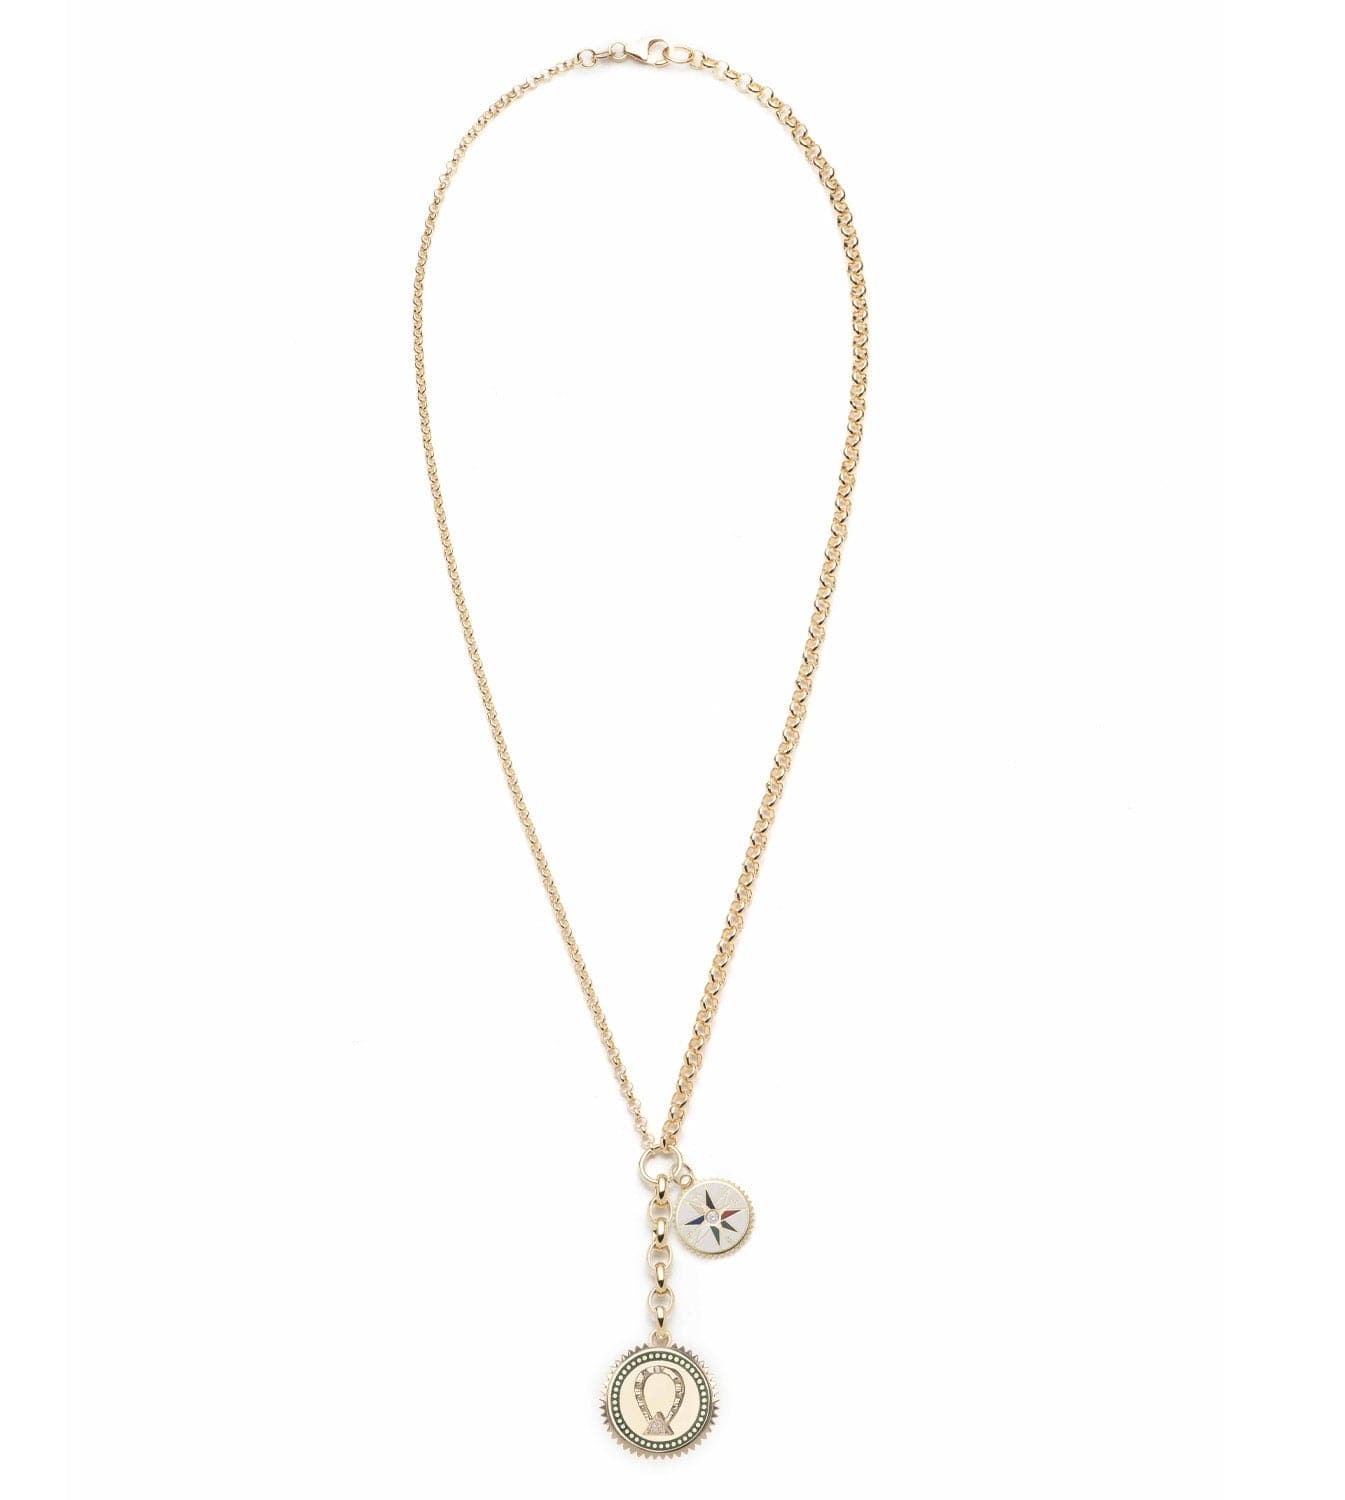 Protection & Internal Compass : Medium Mixed Belcher Extension Chain Necklace